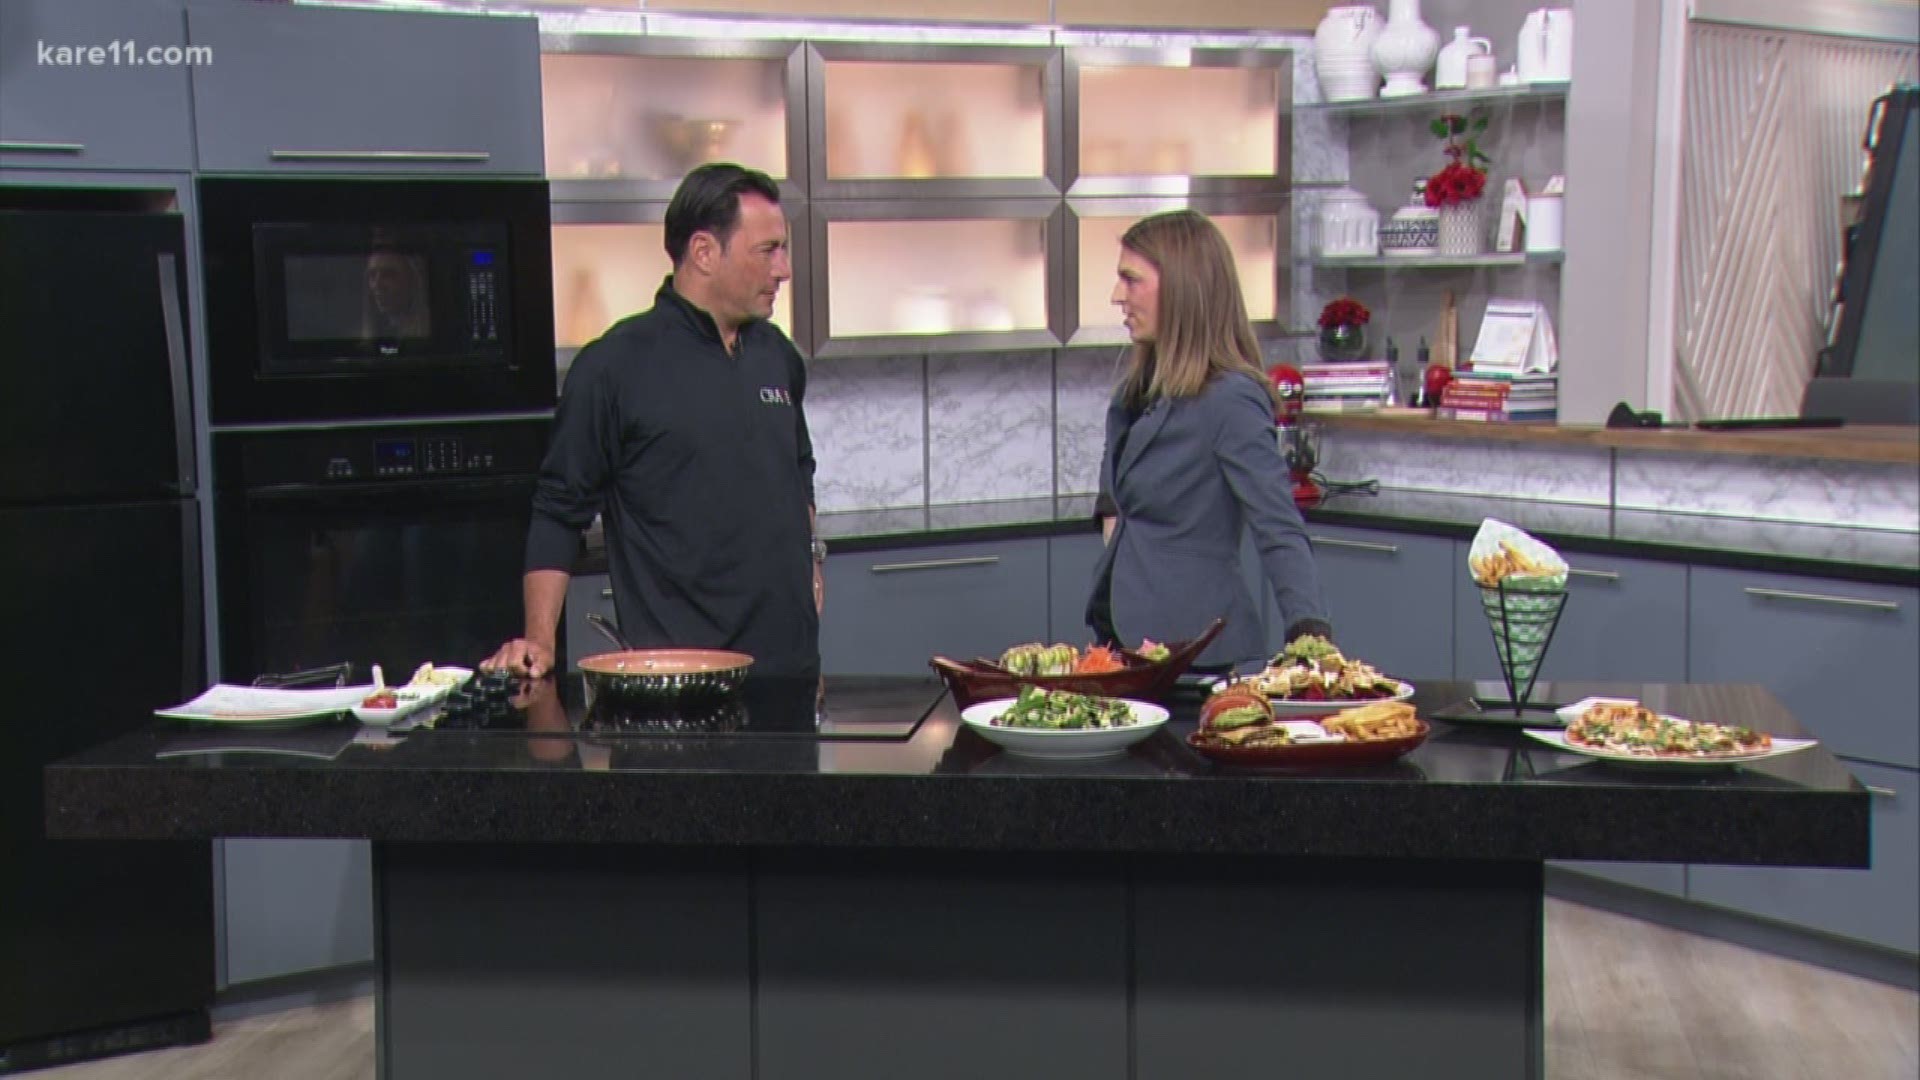 CRAVE chef Daniel Green stopped by KARE 11 Saturday to talk about the restaurant's new vegan options.
https://www.kare11.com/article/life/food/crave-launches-new-vegan-menu/89-184f660c-8cc0-4896-9814-1b923be9c0d0